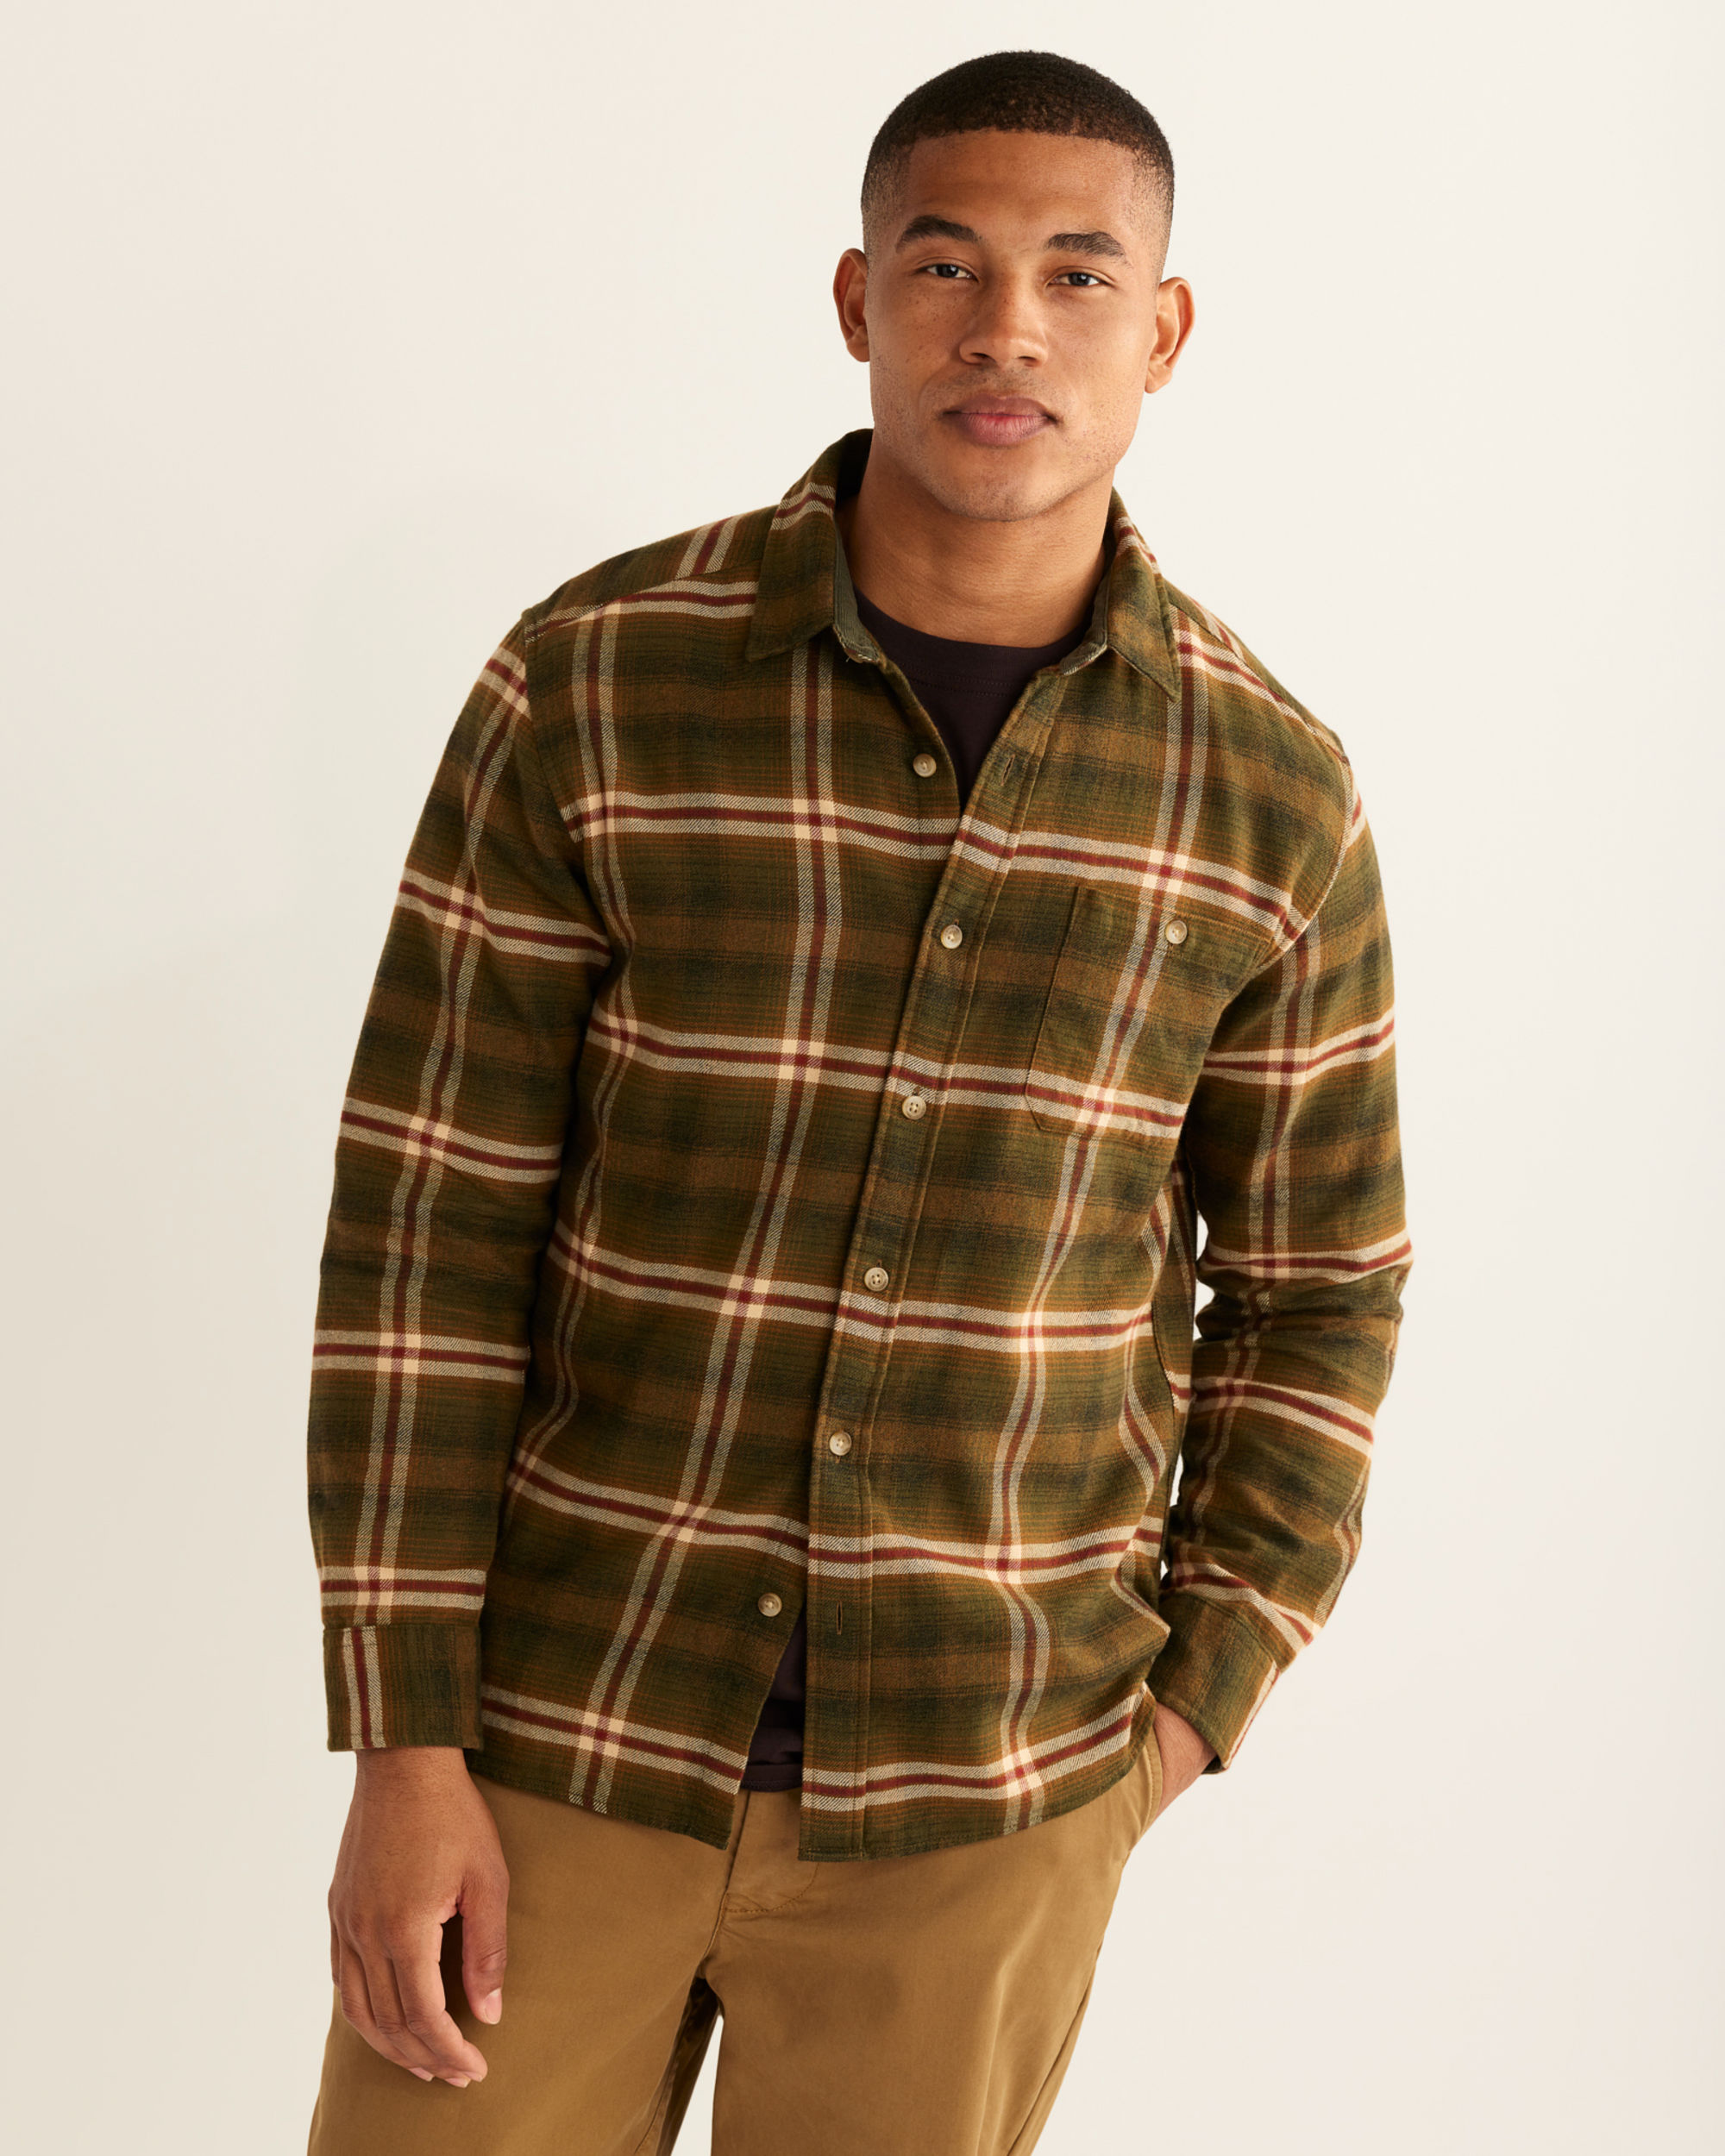 Look Stylish in Men's Fremont Double-Brushed Flannel Shirt | Pendleton